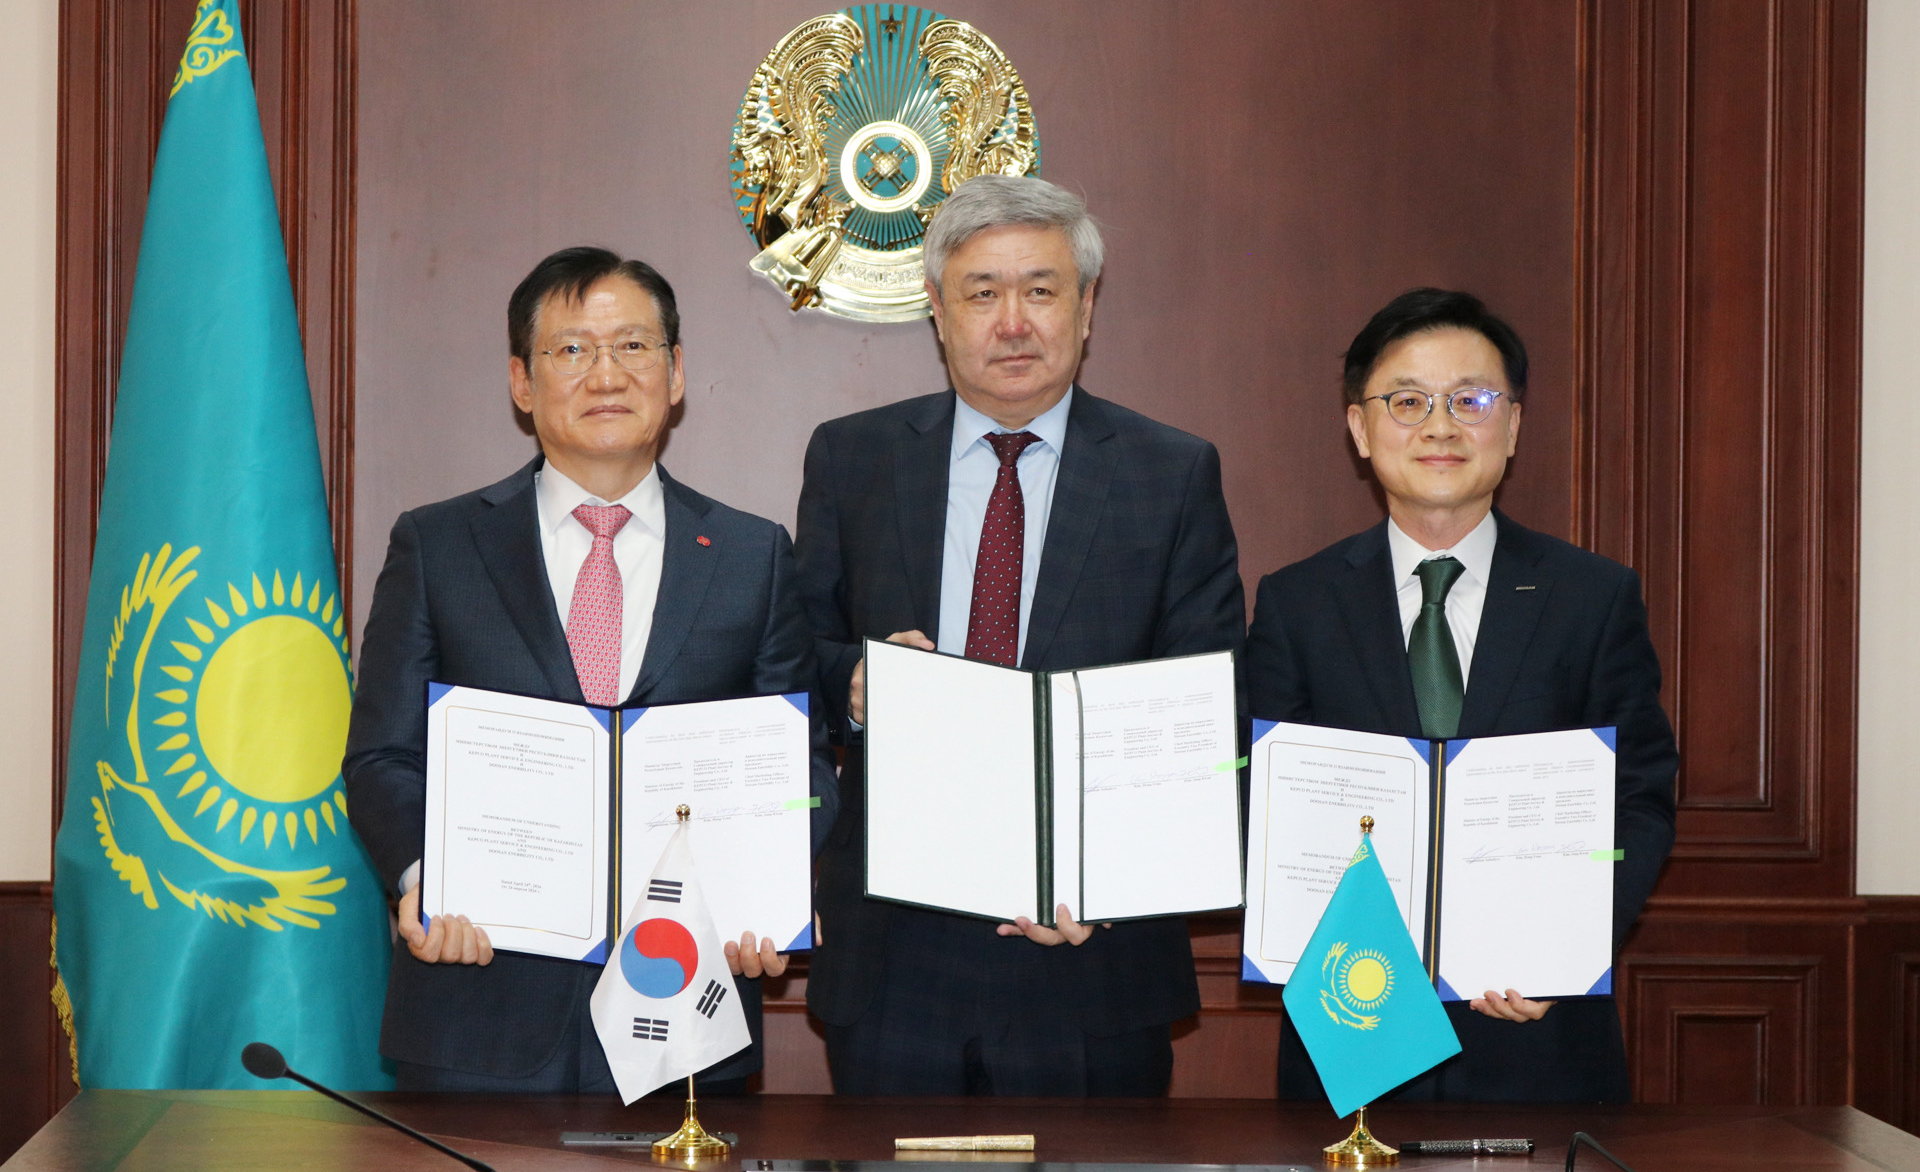 The attendees pose for a group photo at the “MOU on Outdated Power Plant Modernization” signing ceremony that was held in Kazakhstan’s capital, Astana. (From left to right) Hongyoun Kim, CEO of KEPCO KPS; Sungat Yessimkhanov, Kazakhstan’s Vice Minister of Energy; Jungkwan Kim, CMO of Doosan Enerbility.